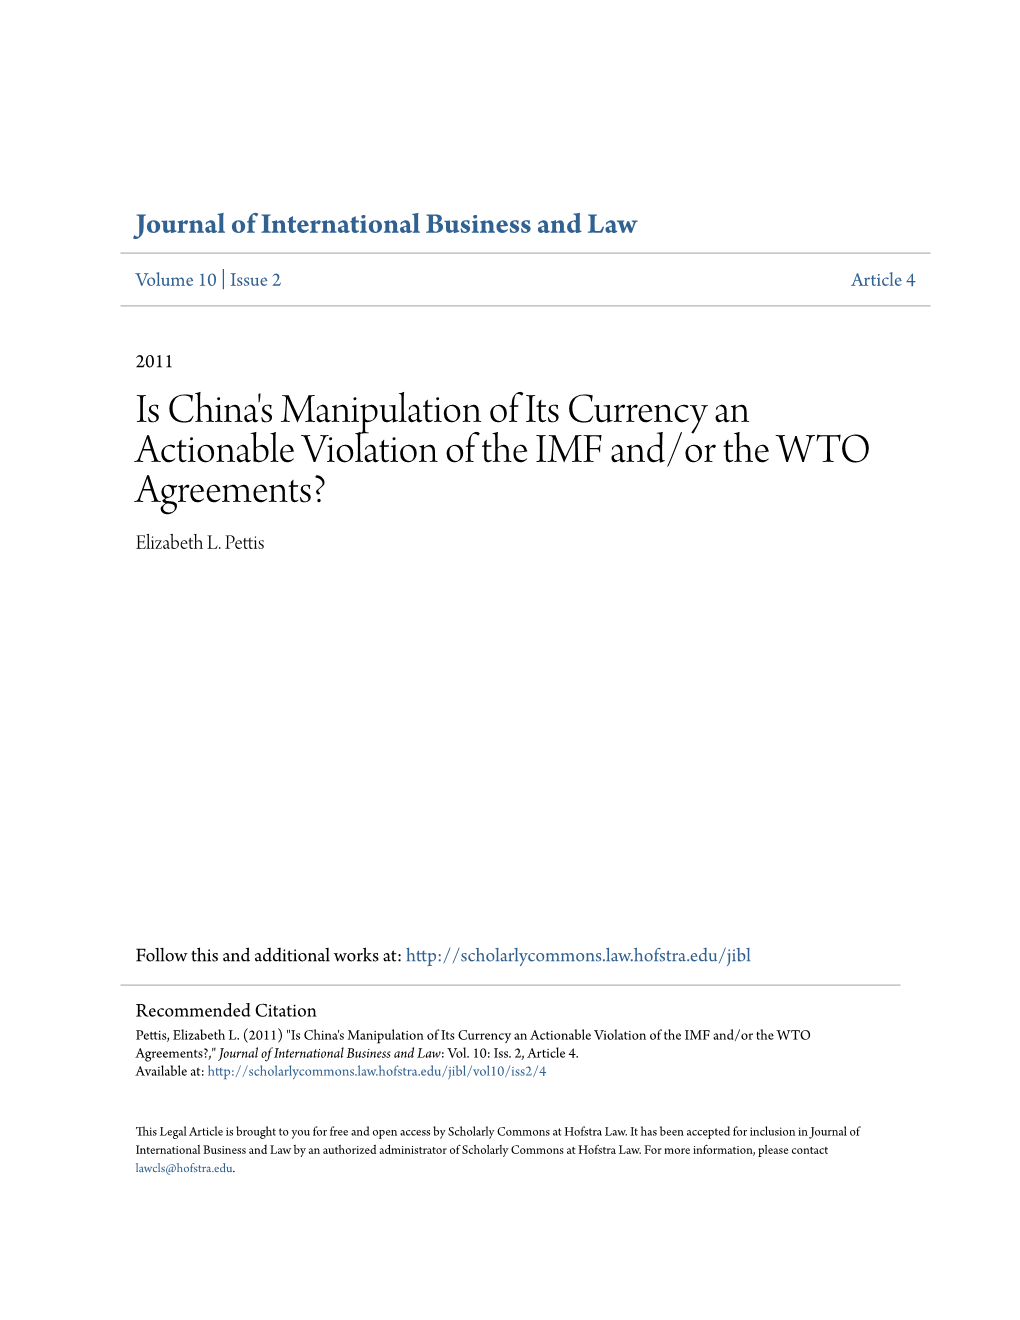 Is China's Manipulation of Its Currency an Actionable Violation of the IMF And/Or the WTO Agreements? Elizabeth L